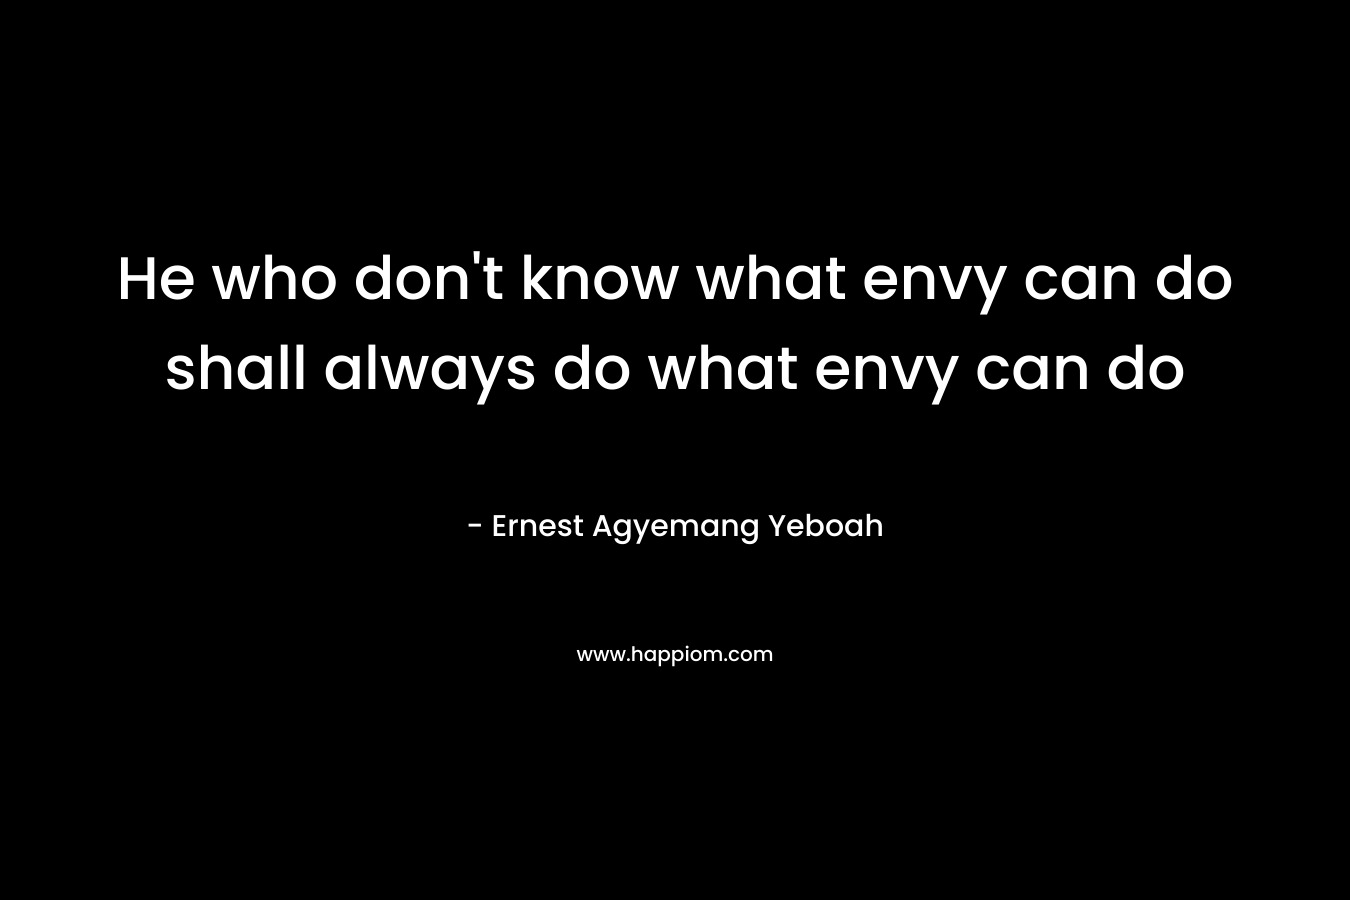 He who don't know what envy can do shall always do what envy can do